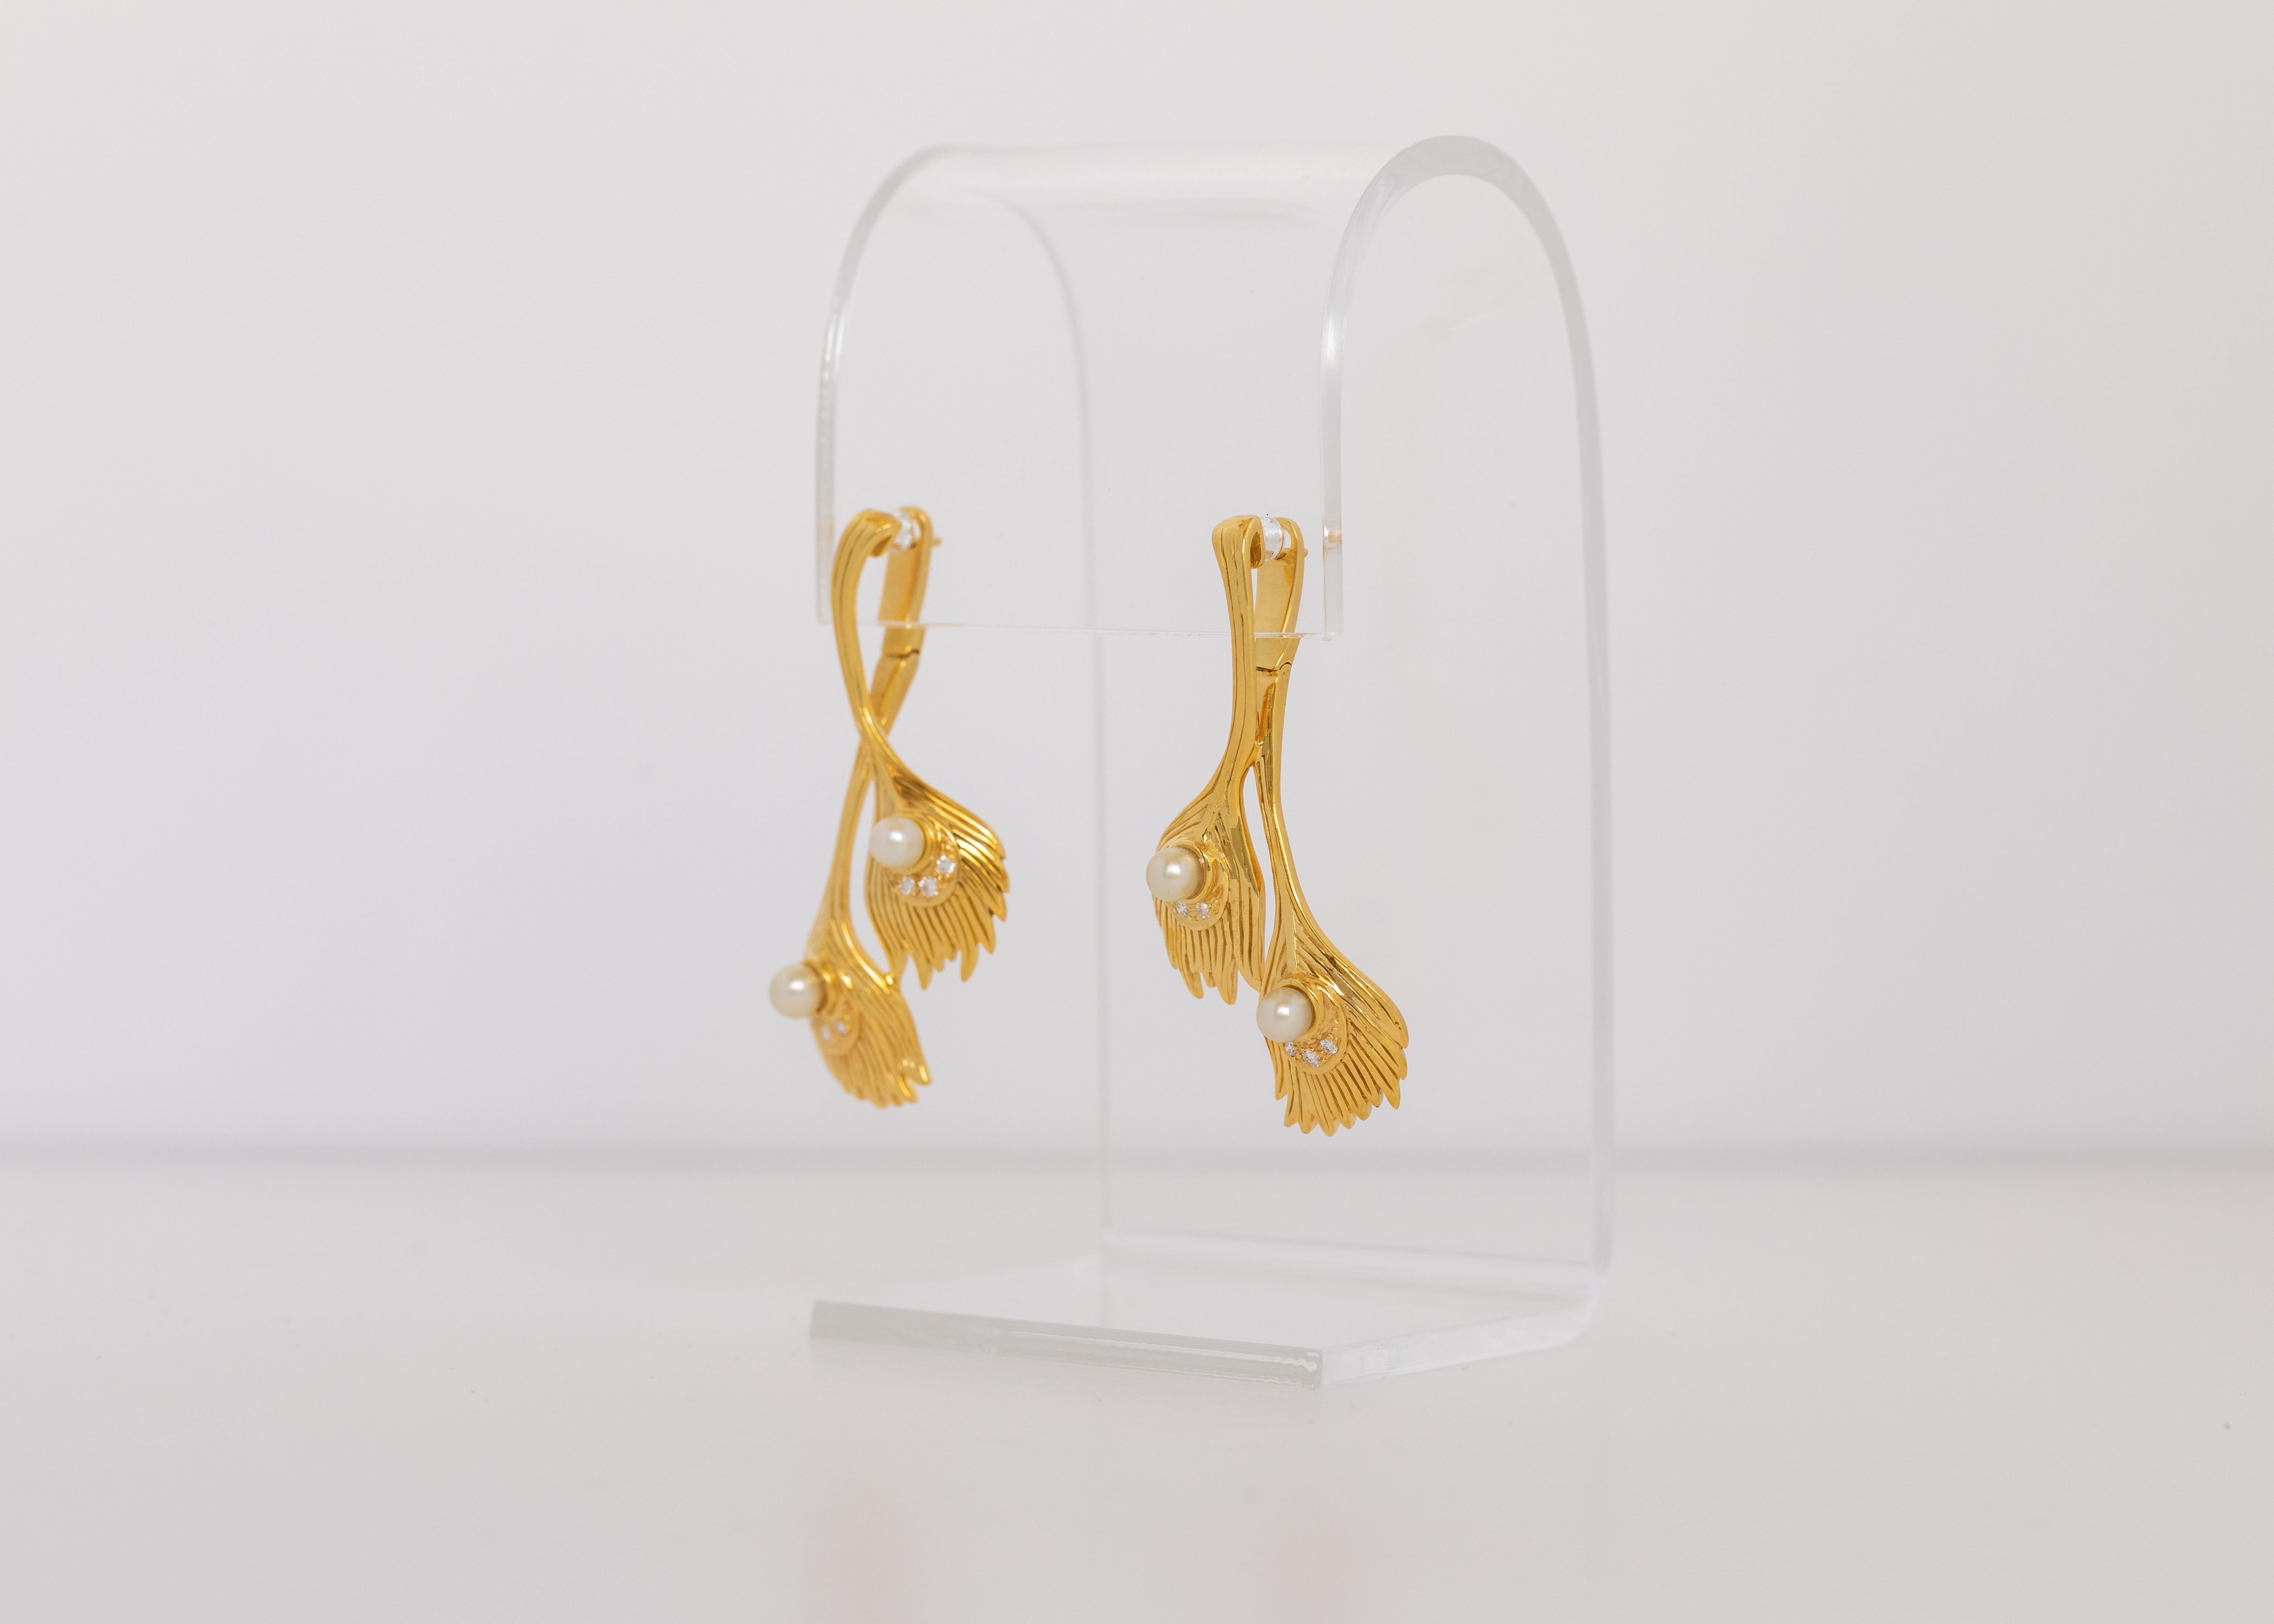 Round Cut Connected Leaves Earrings in 18 Kt Gold and Certified Natural Bahraini Pearls